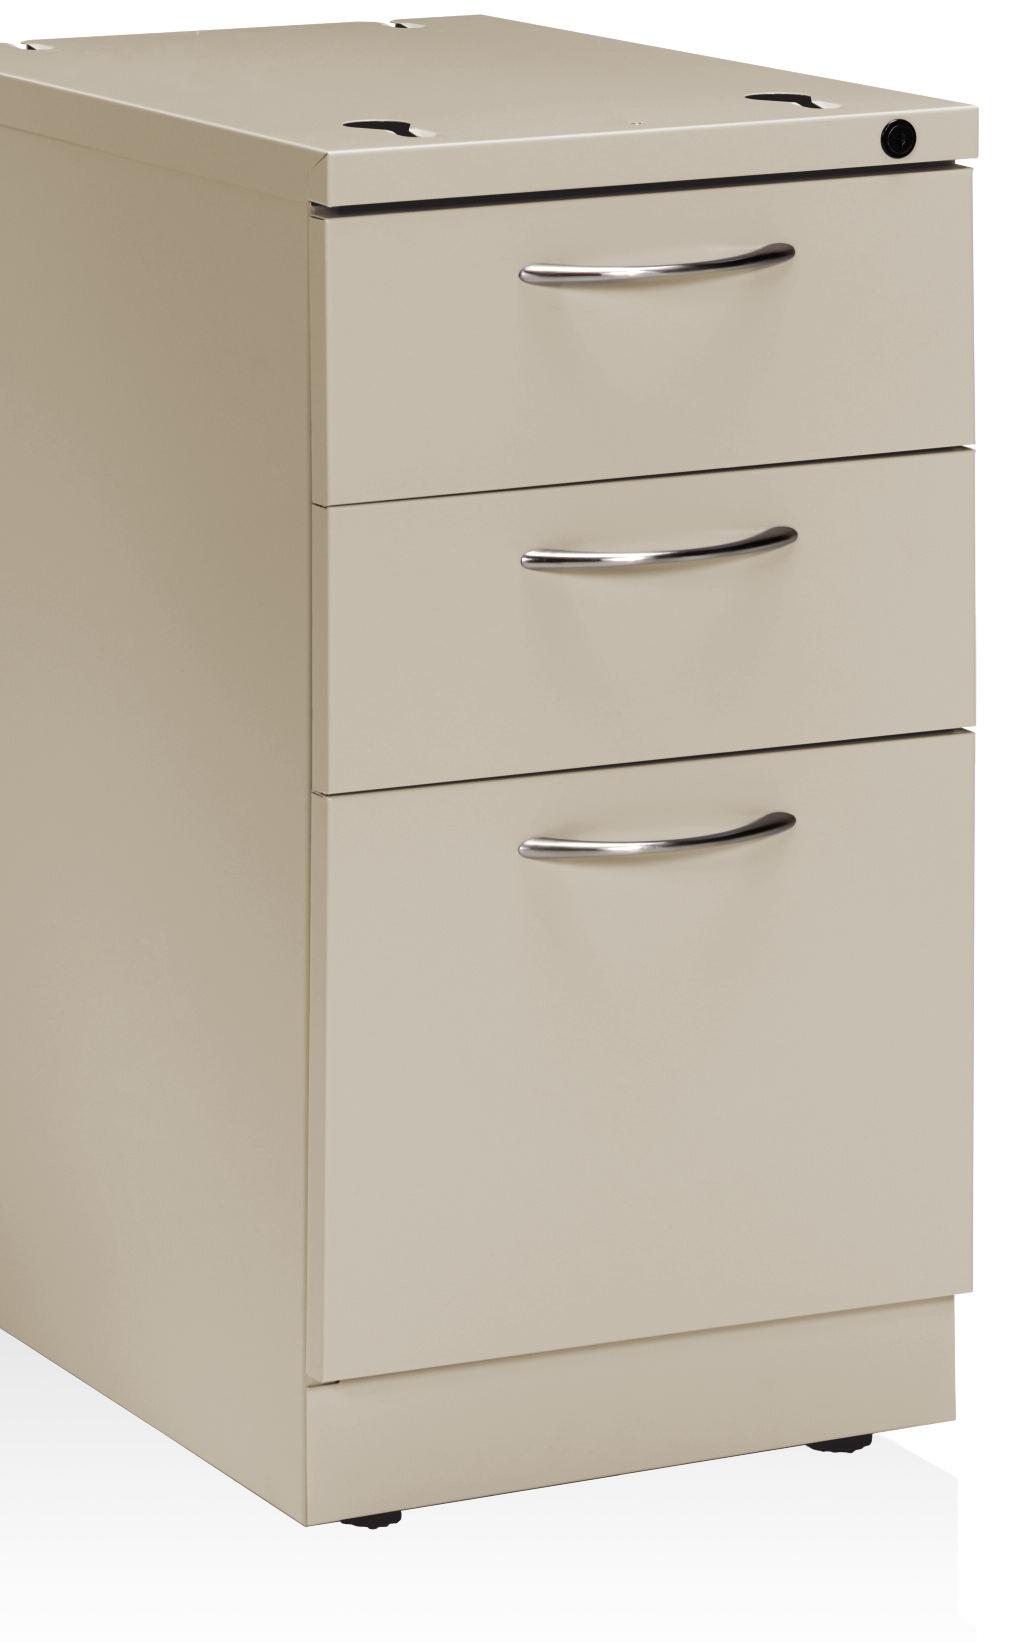 Shoulder bolts screwed into the underside of the worksurface engage with the keyhole slots in the tops of the file cabinets to easily and securely join the two during